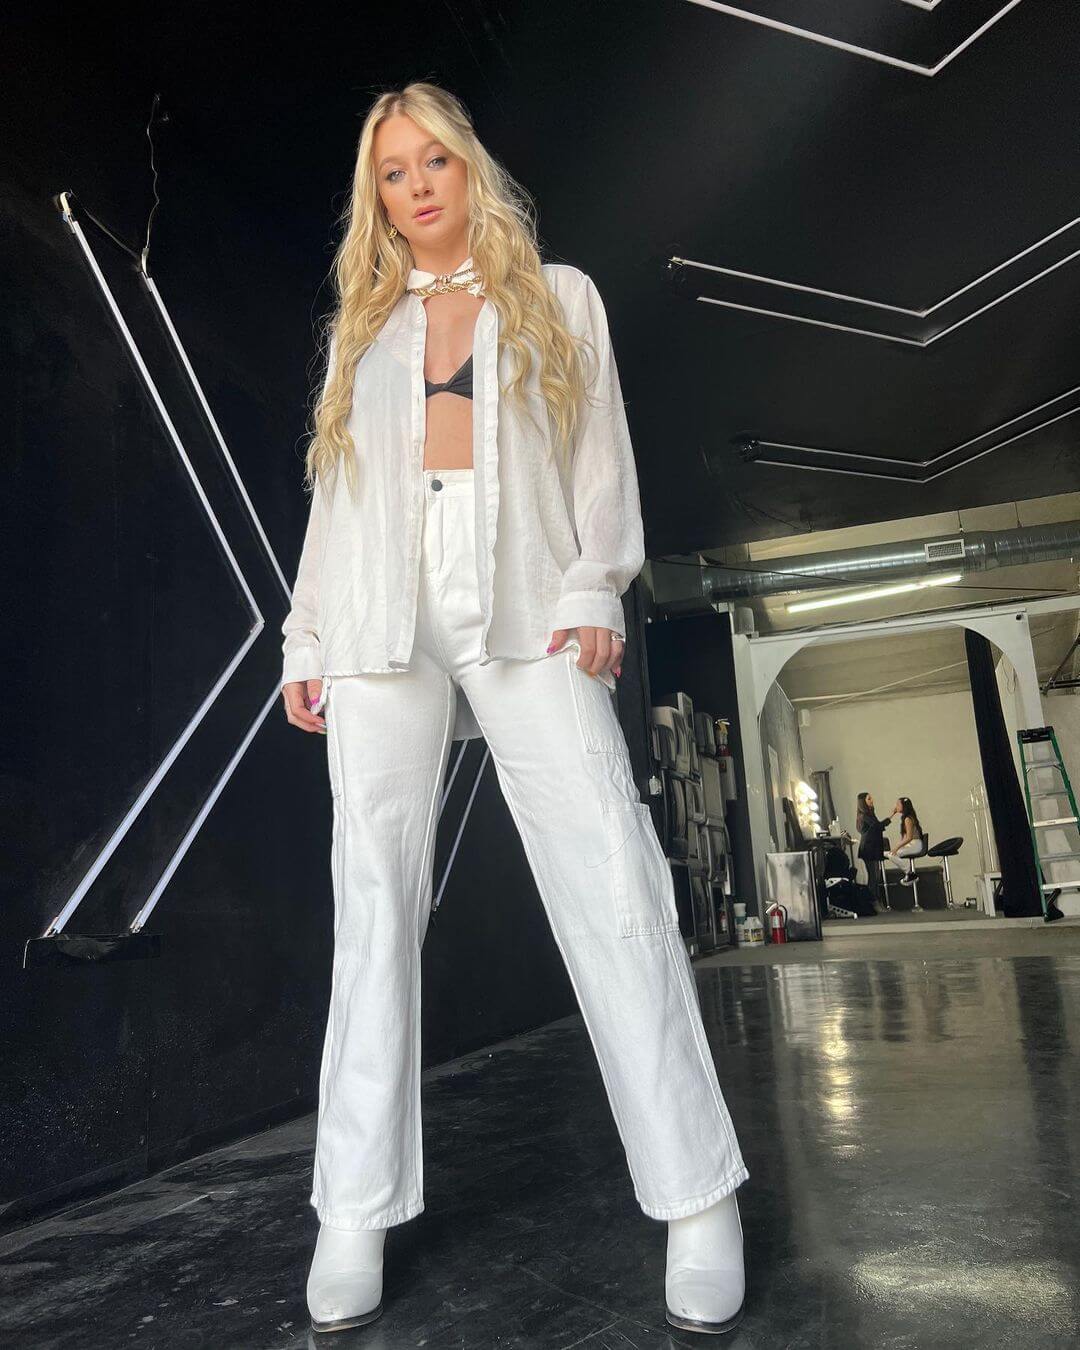 Mollee Gray In Sexy White Open Shirt & Pant Look